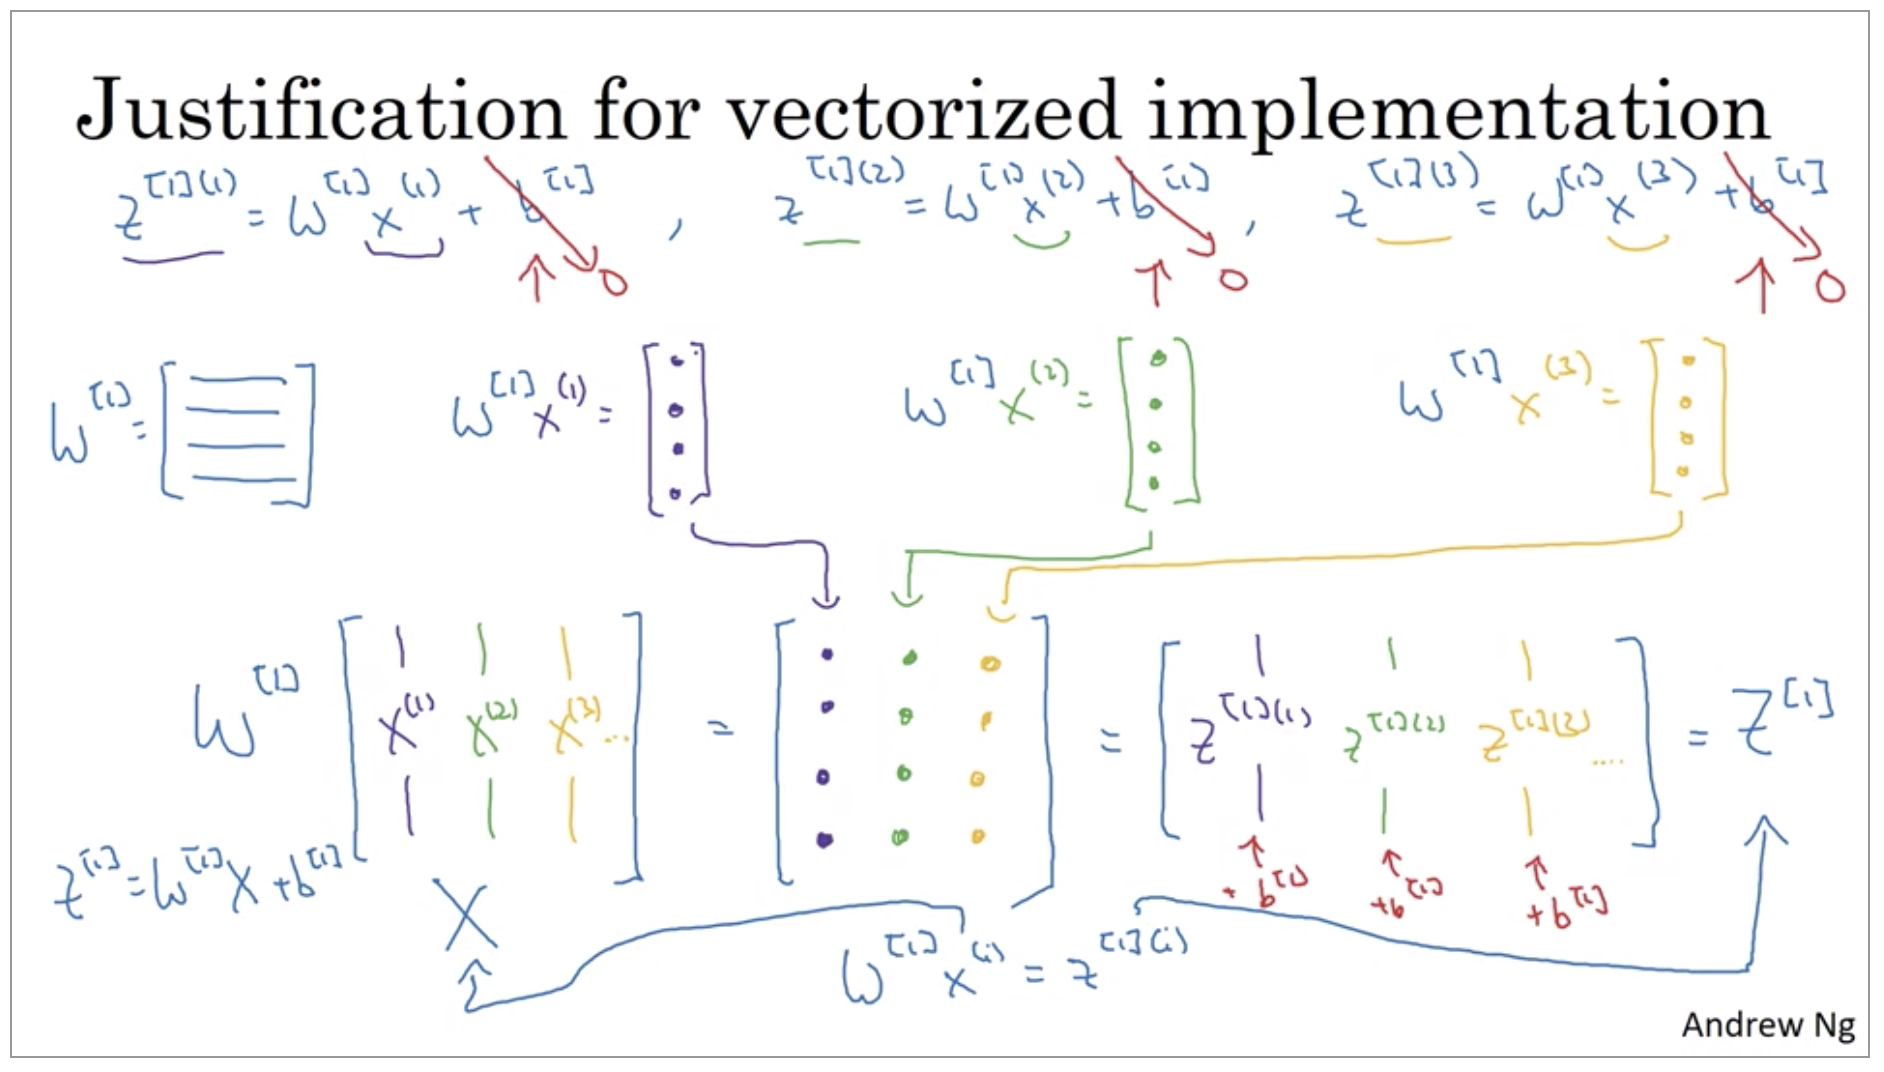 justification-for-vectorized-implementation.png